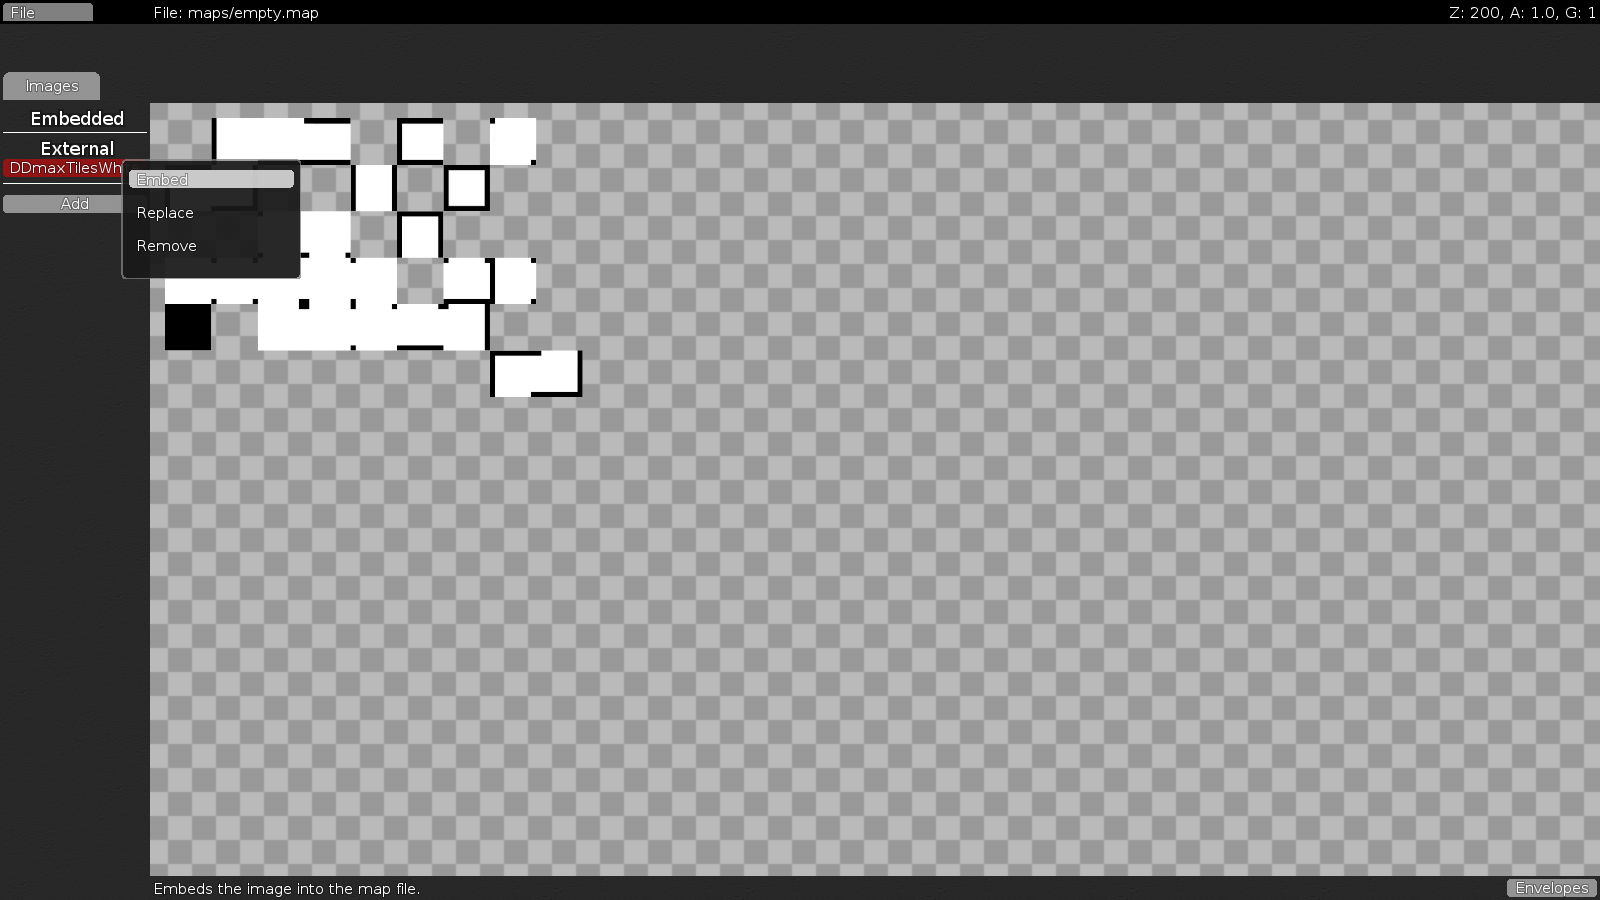 HowTo (tileset is just an example)